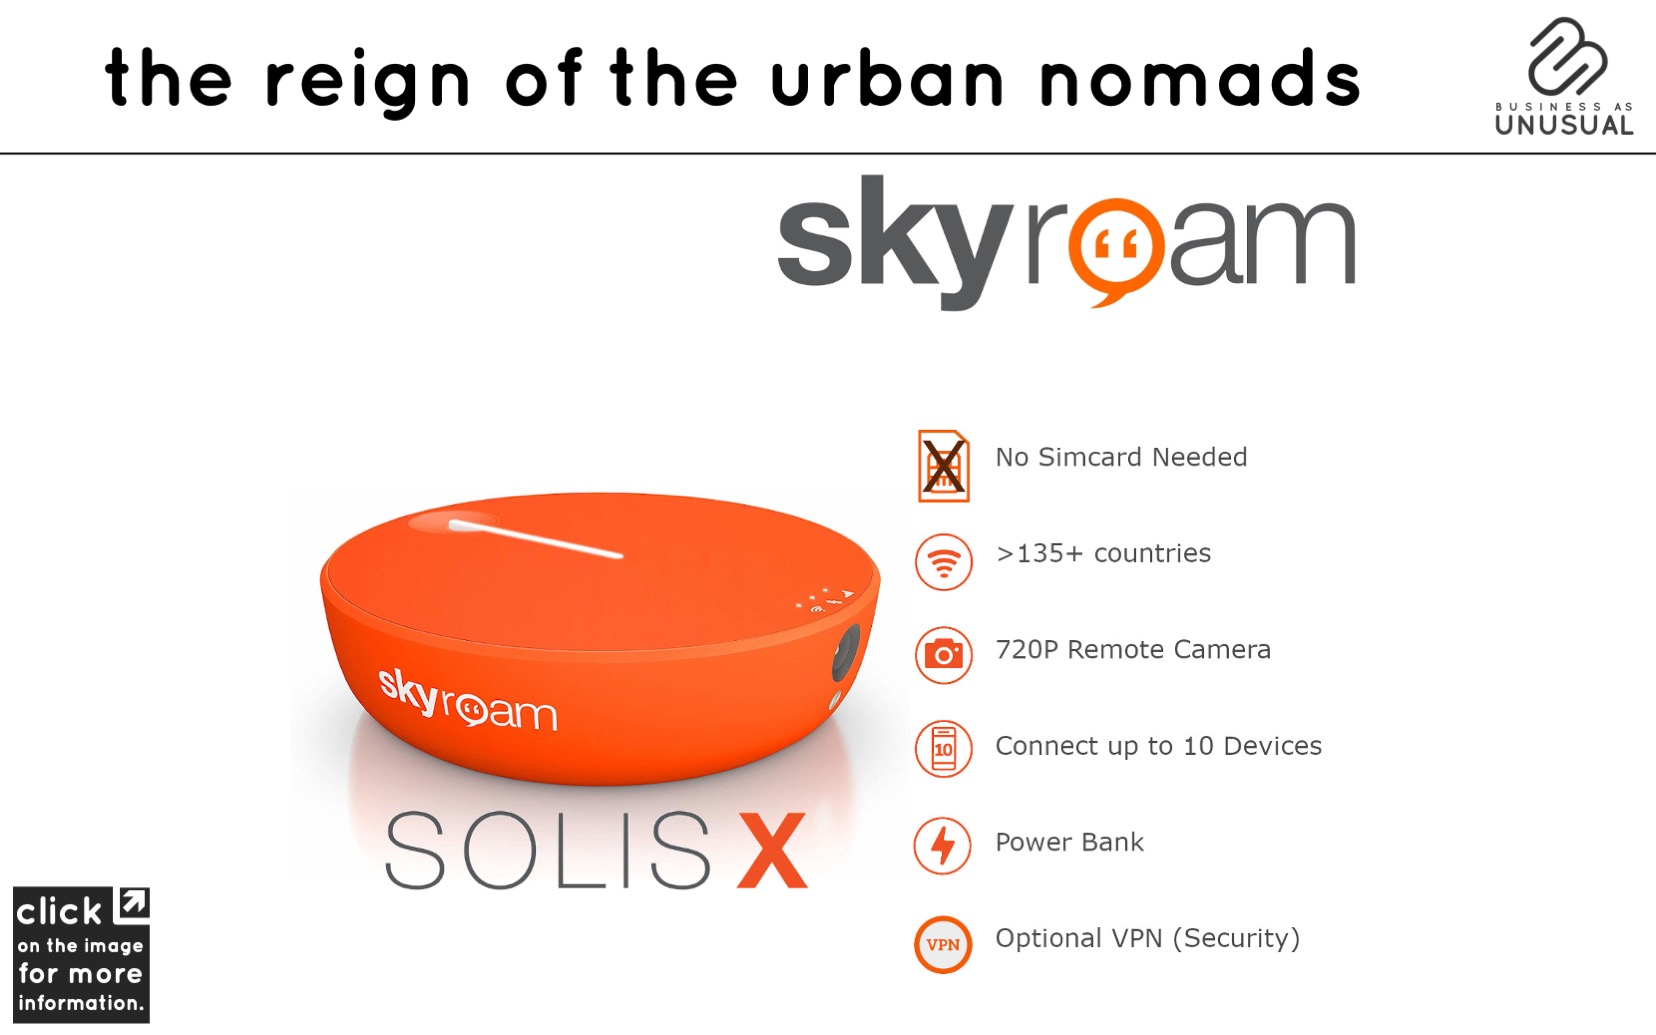 The Reign of the Urban Nomads - Skyroam